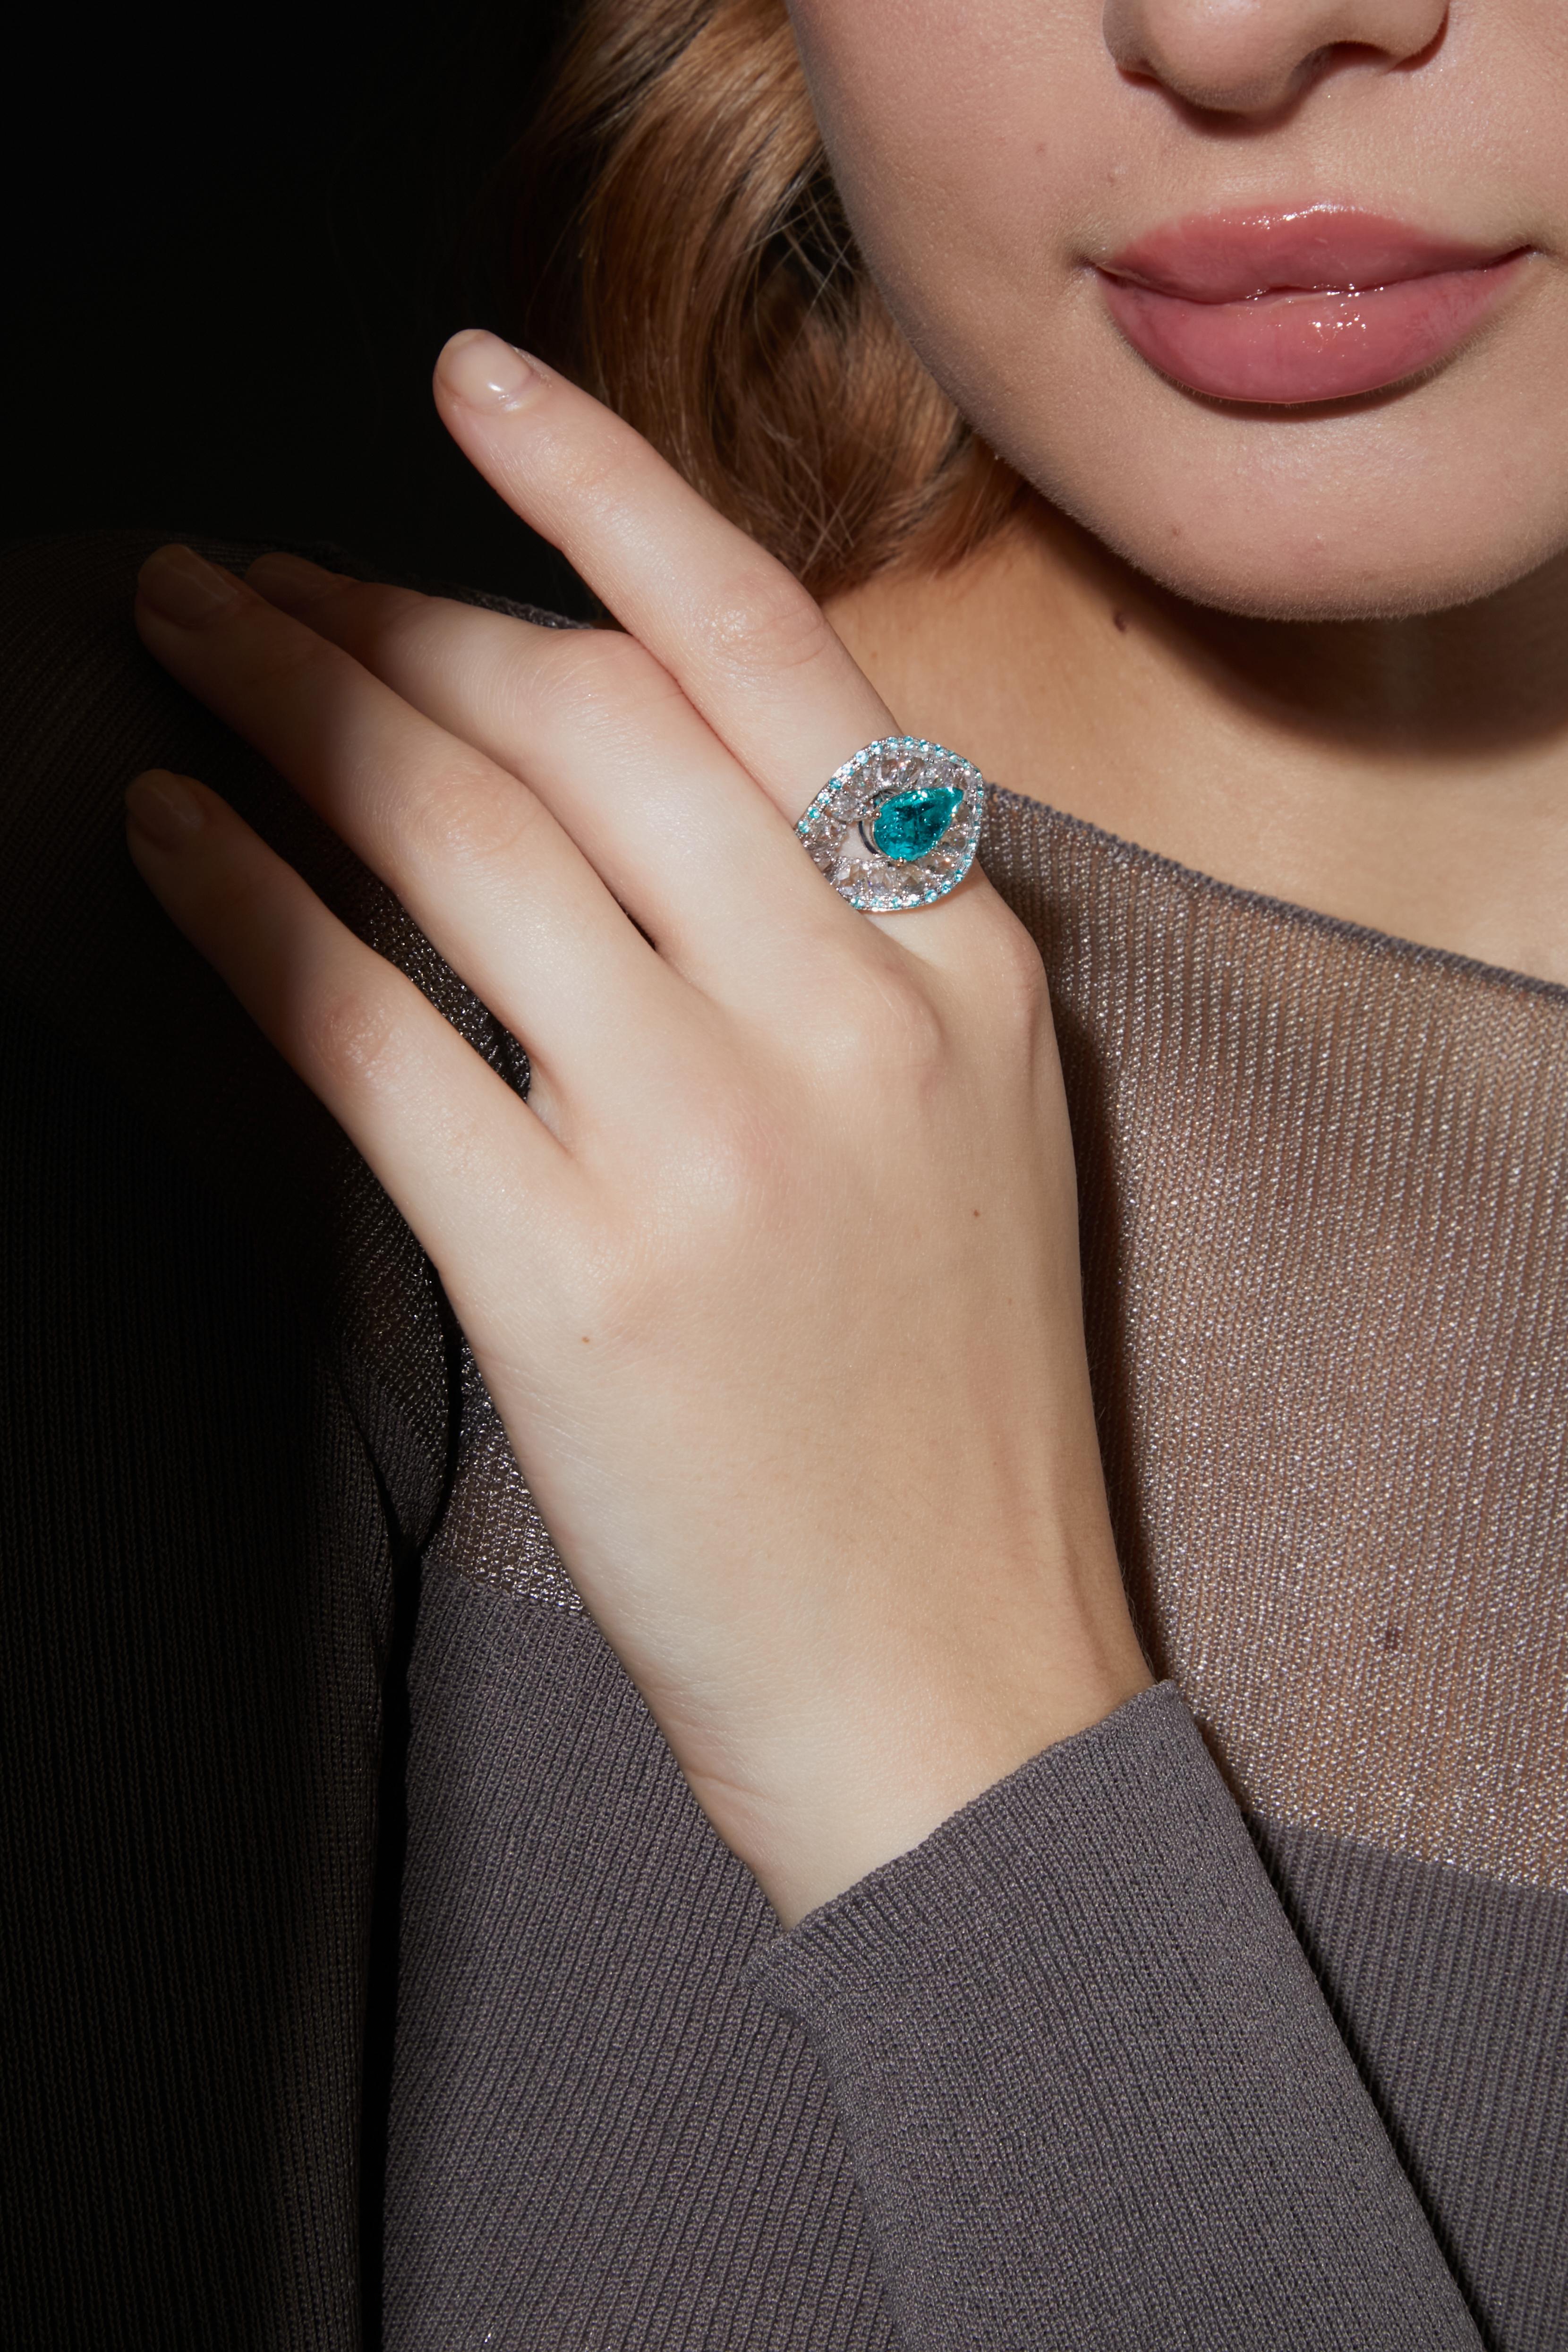 Sunita Nahata Fine Design presents the second edition of its Blue Planet collection – an ode to deep greens and blues with splashes of alexandrites, paraibas and diamonds in white gold. The Ocean Eyes ring features a 2.30 carat pear-shaped Brazilian